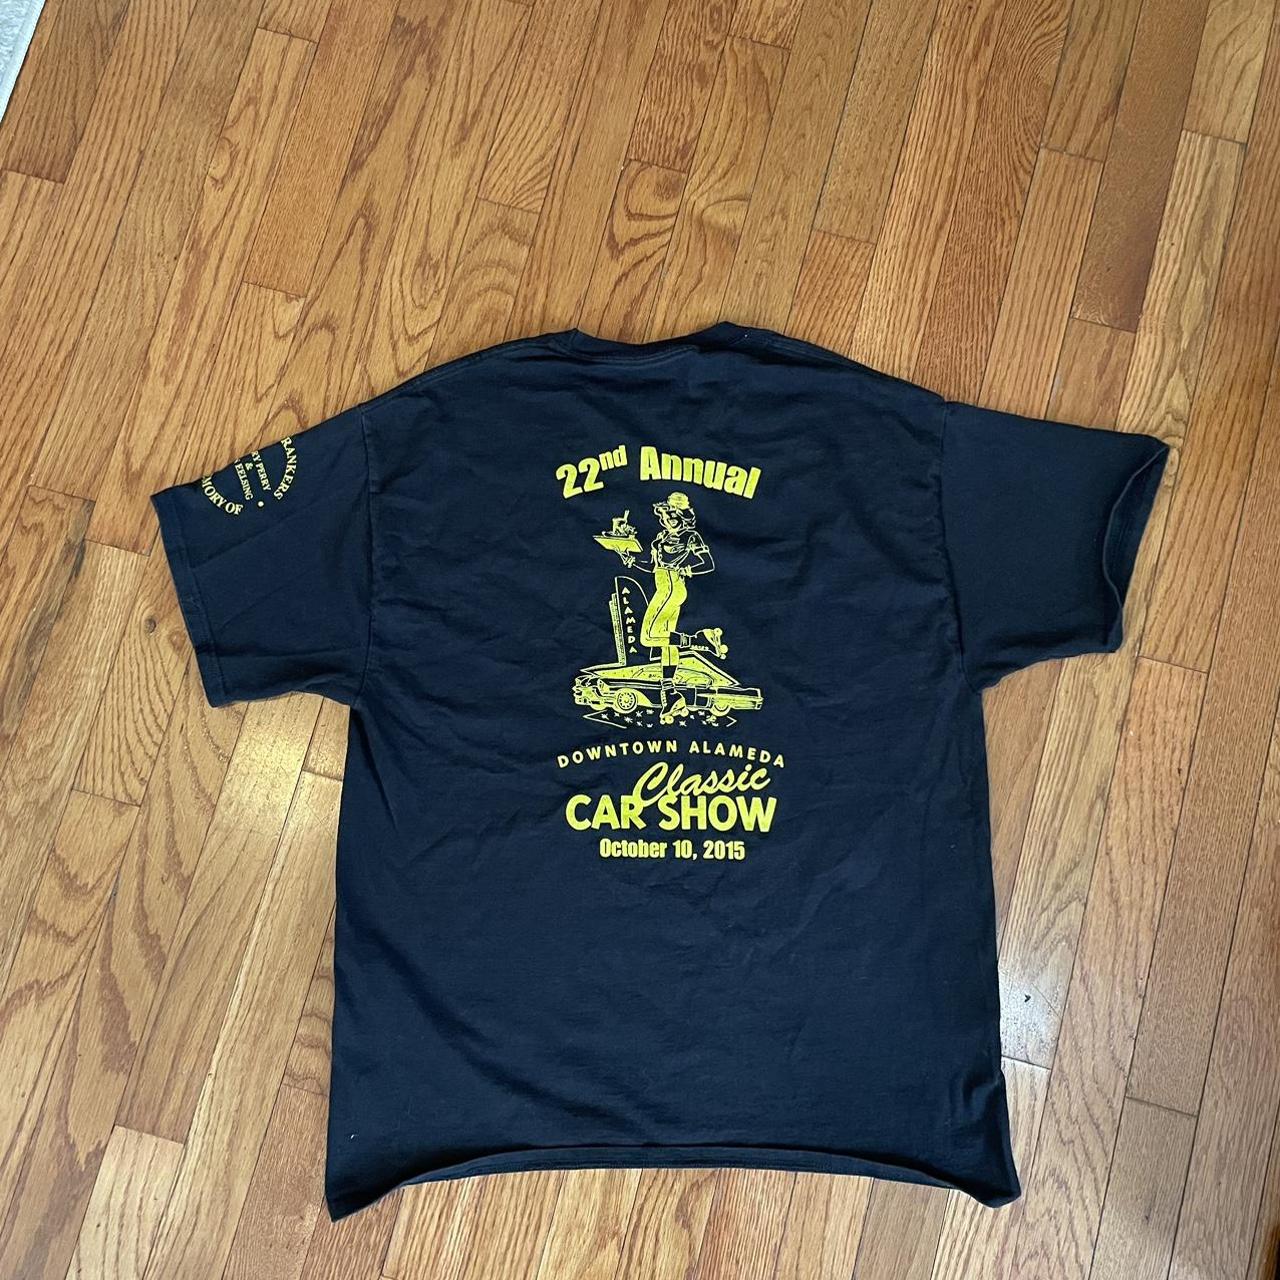 22nd annual classic car show tee from 2015 *FREE... - Depop